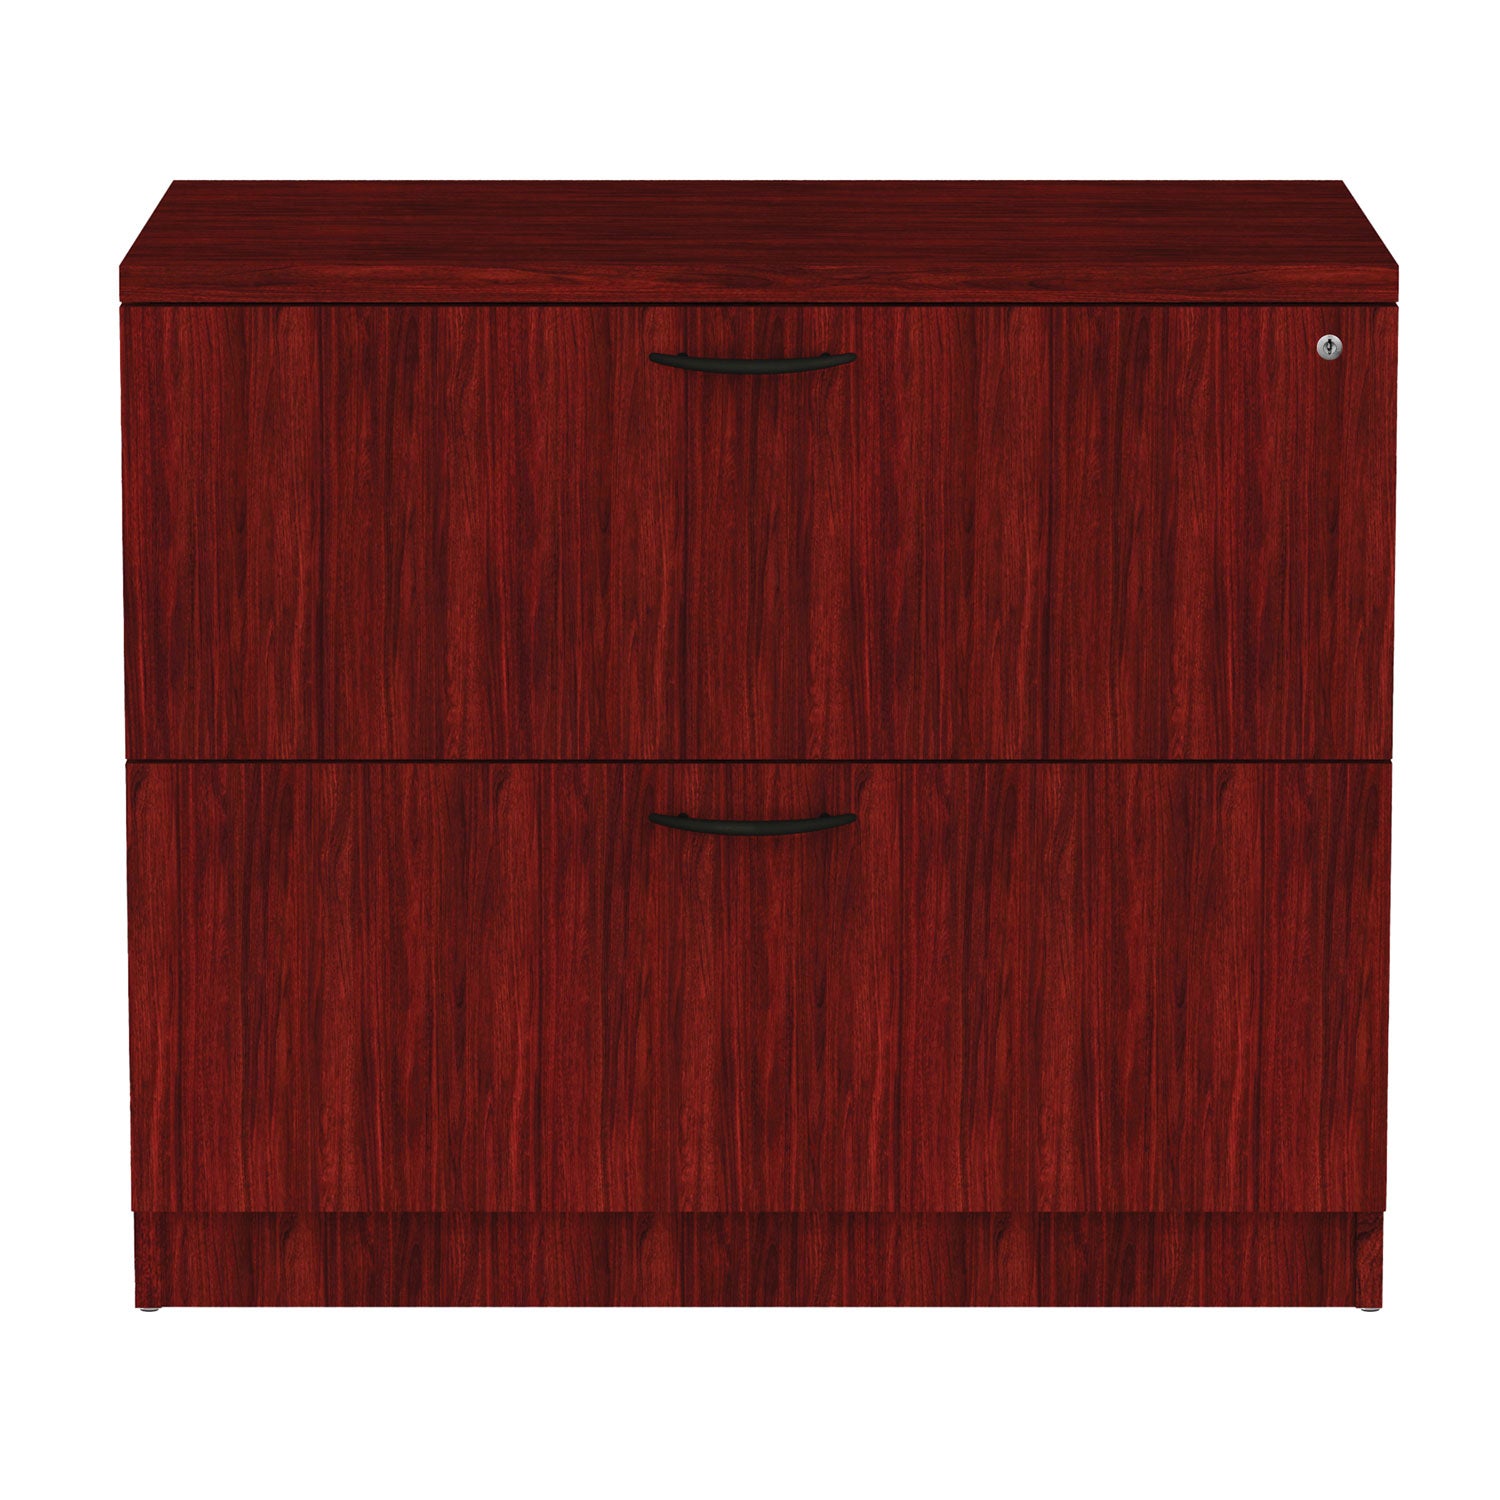 Alera Valencia Series Lateral File, 2 Legal/Letter-Size File Drawers, Mahogany, 34" x 22.75" x 29.5 - 